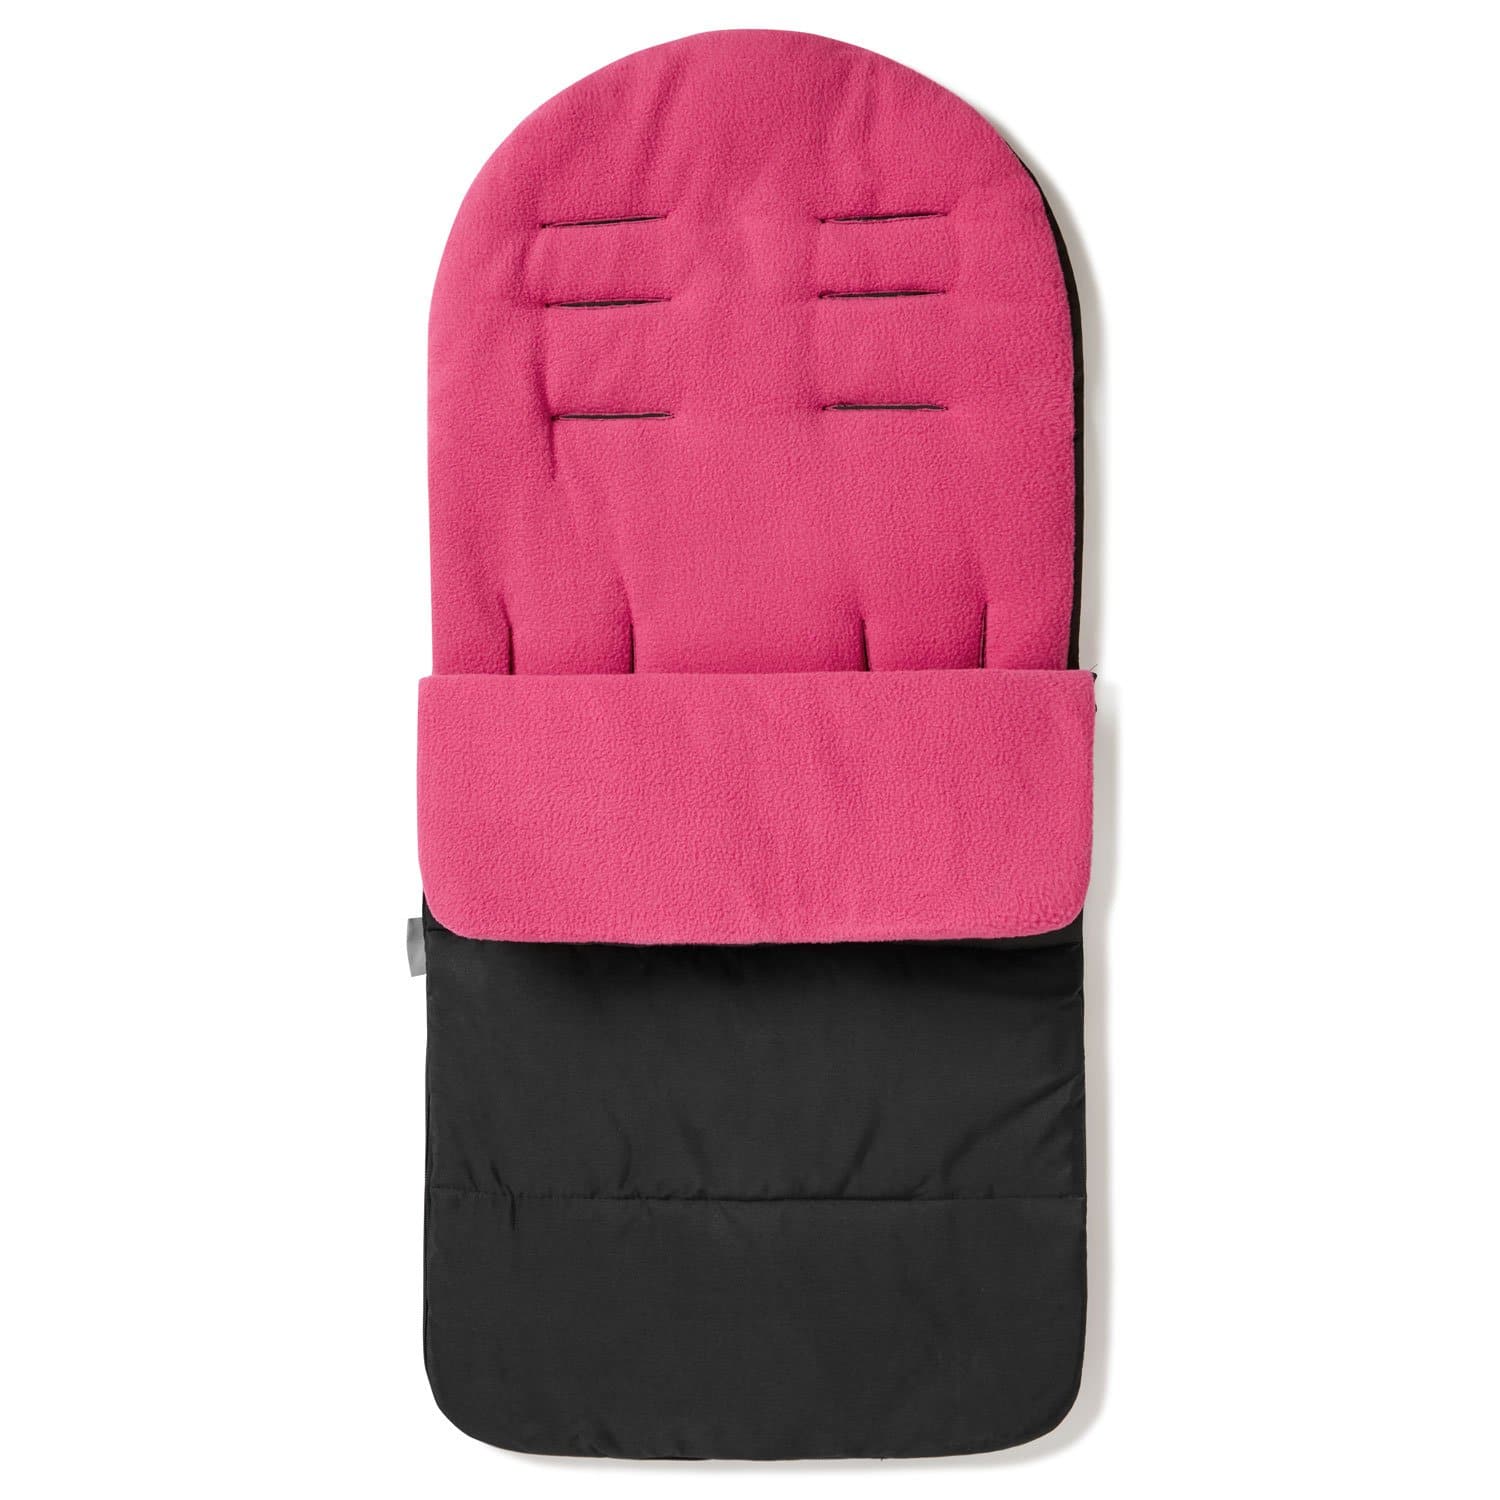 Premium Footmuff / Cosy Toes Compatible with Formula - Pink Rose / Fits All Models | For Your Little One